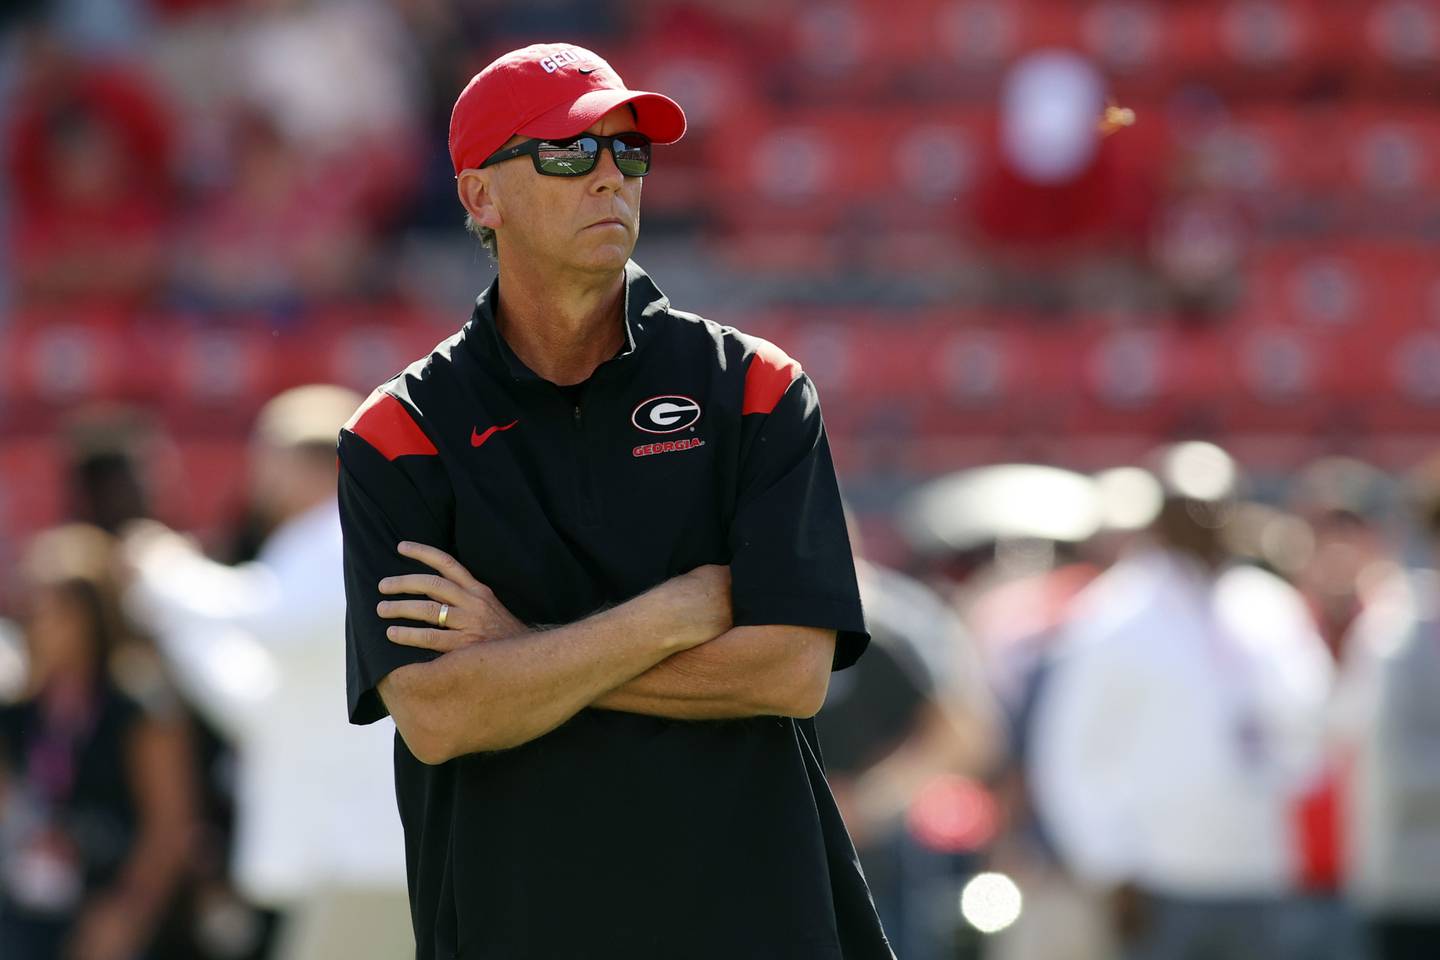 FILE - Georgia offensive coordinator Todd Monken watches before an NCAA college football game against Vanderbilt on Oct. 15, 2022 in Athens, Ga. The Baltimore Ravens have hired Monken to be their offensive coordinator, the team announced Tuesday, Feb. 1 4, 2023.